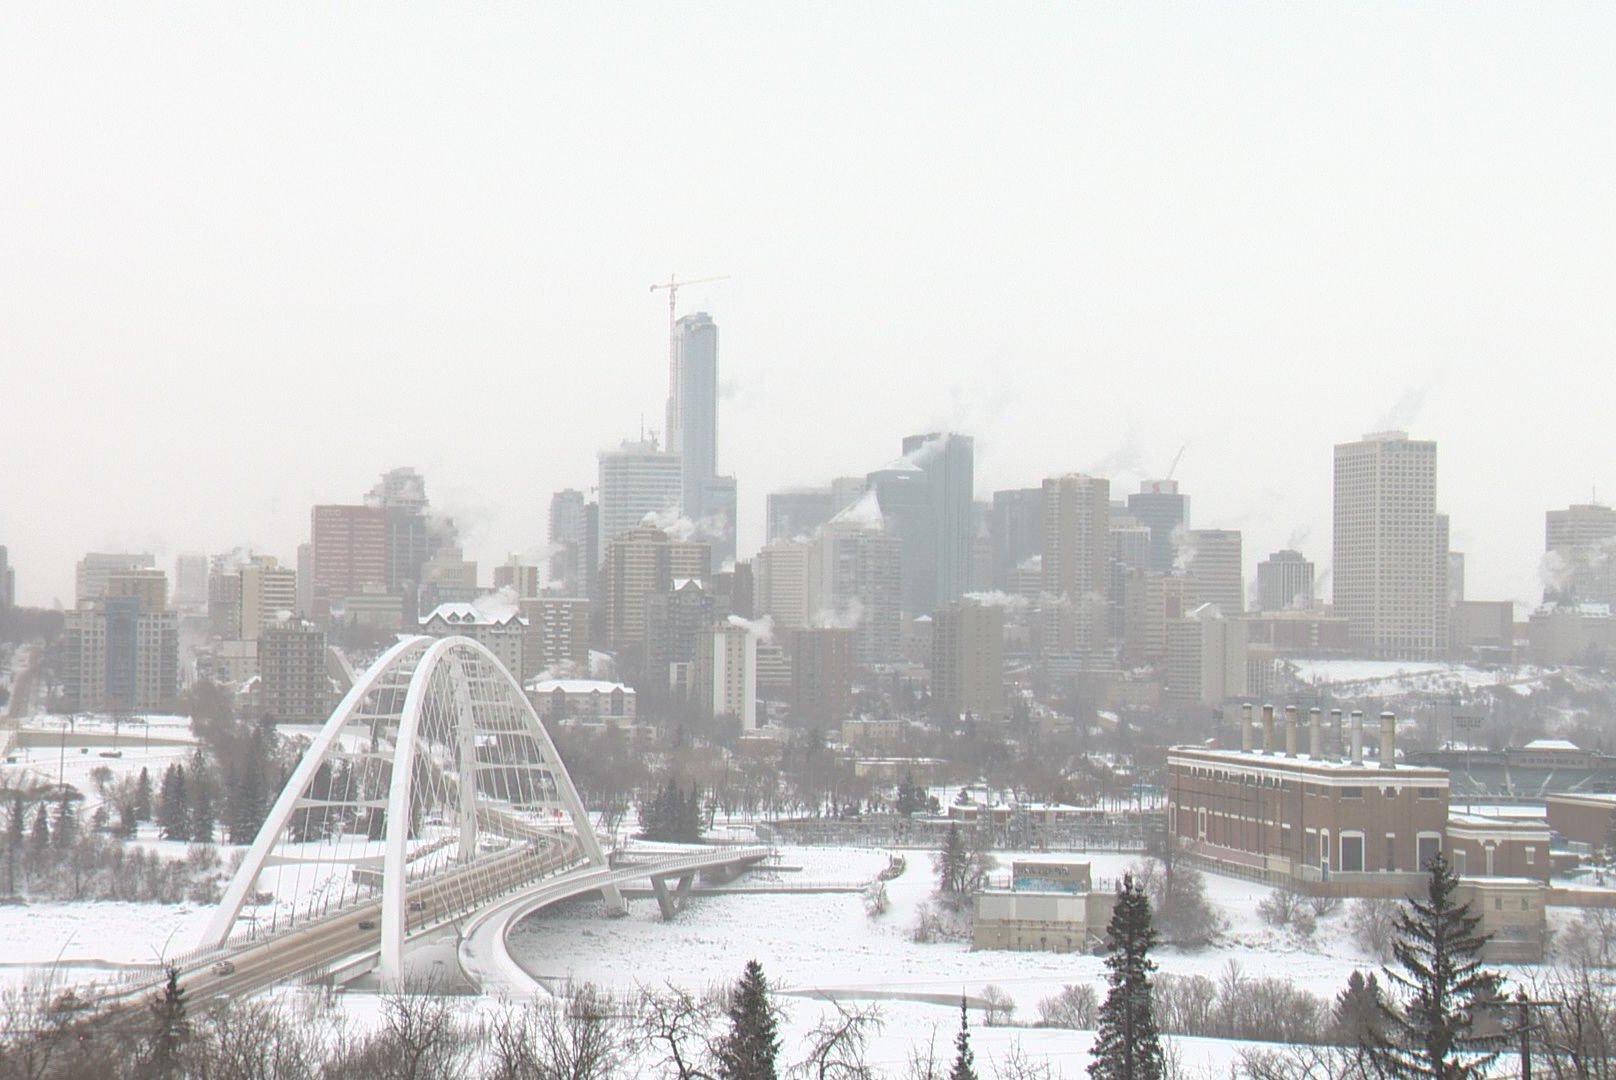 A cold snap in Edmonton saw temperatures dip to the -30s February 2019.